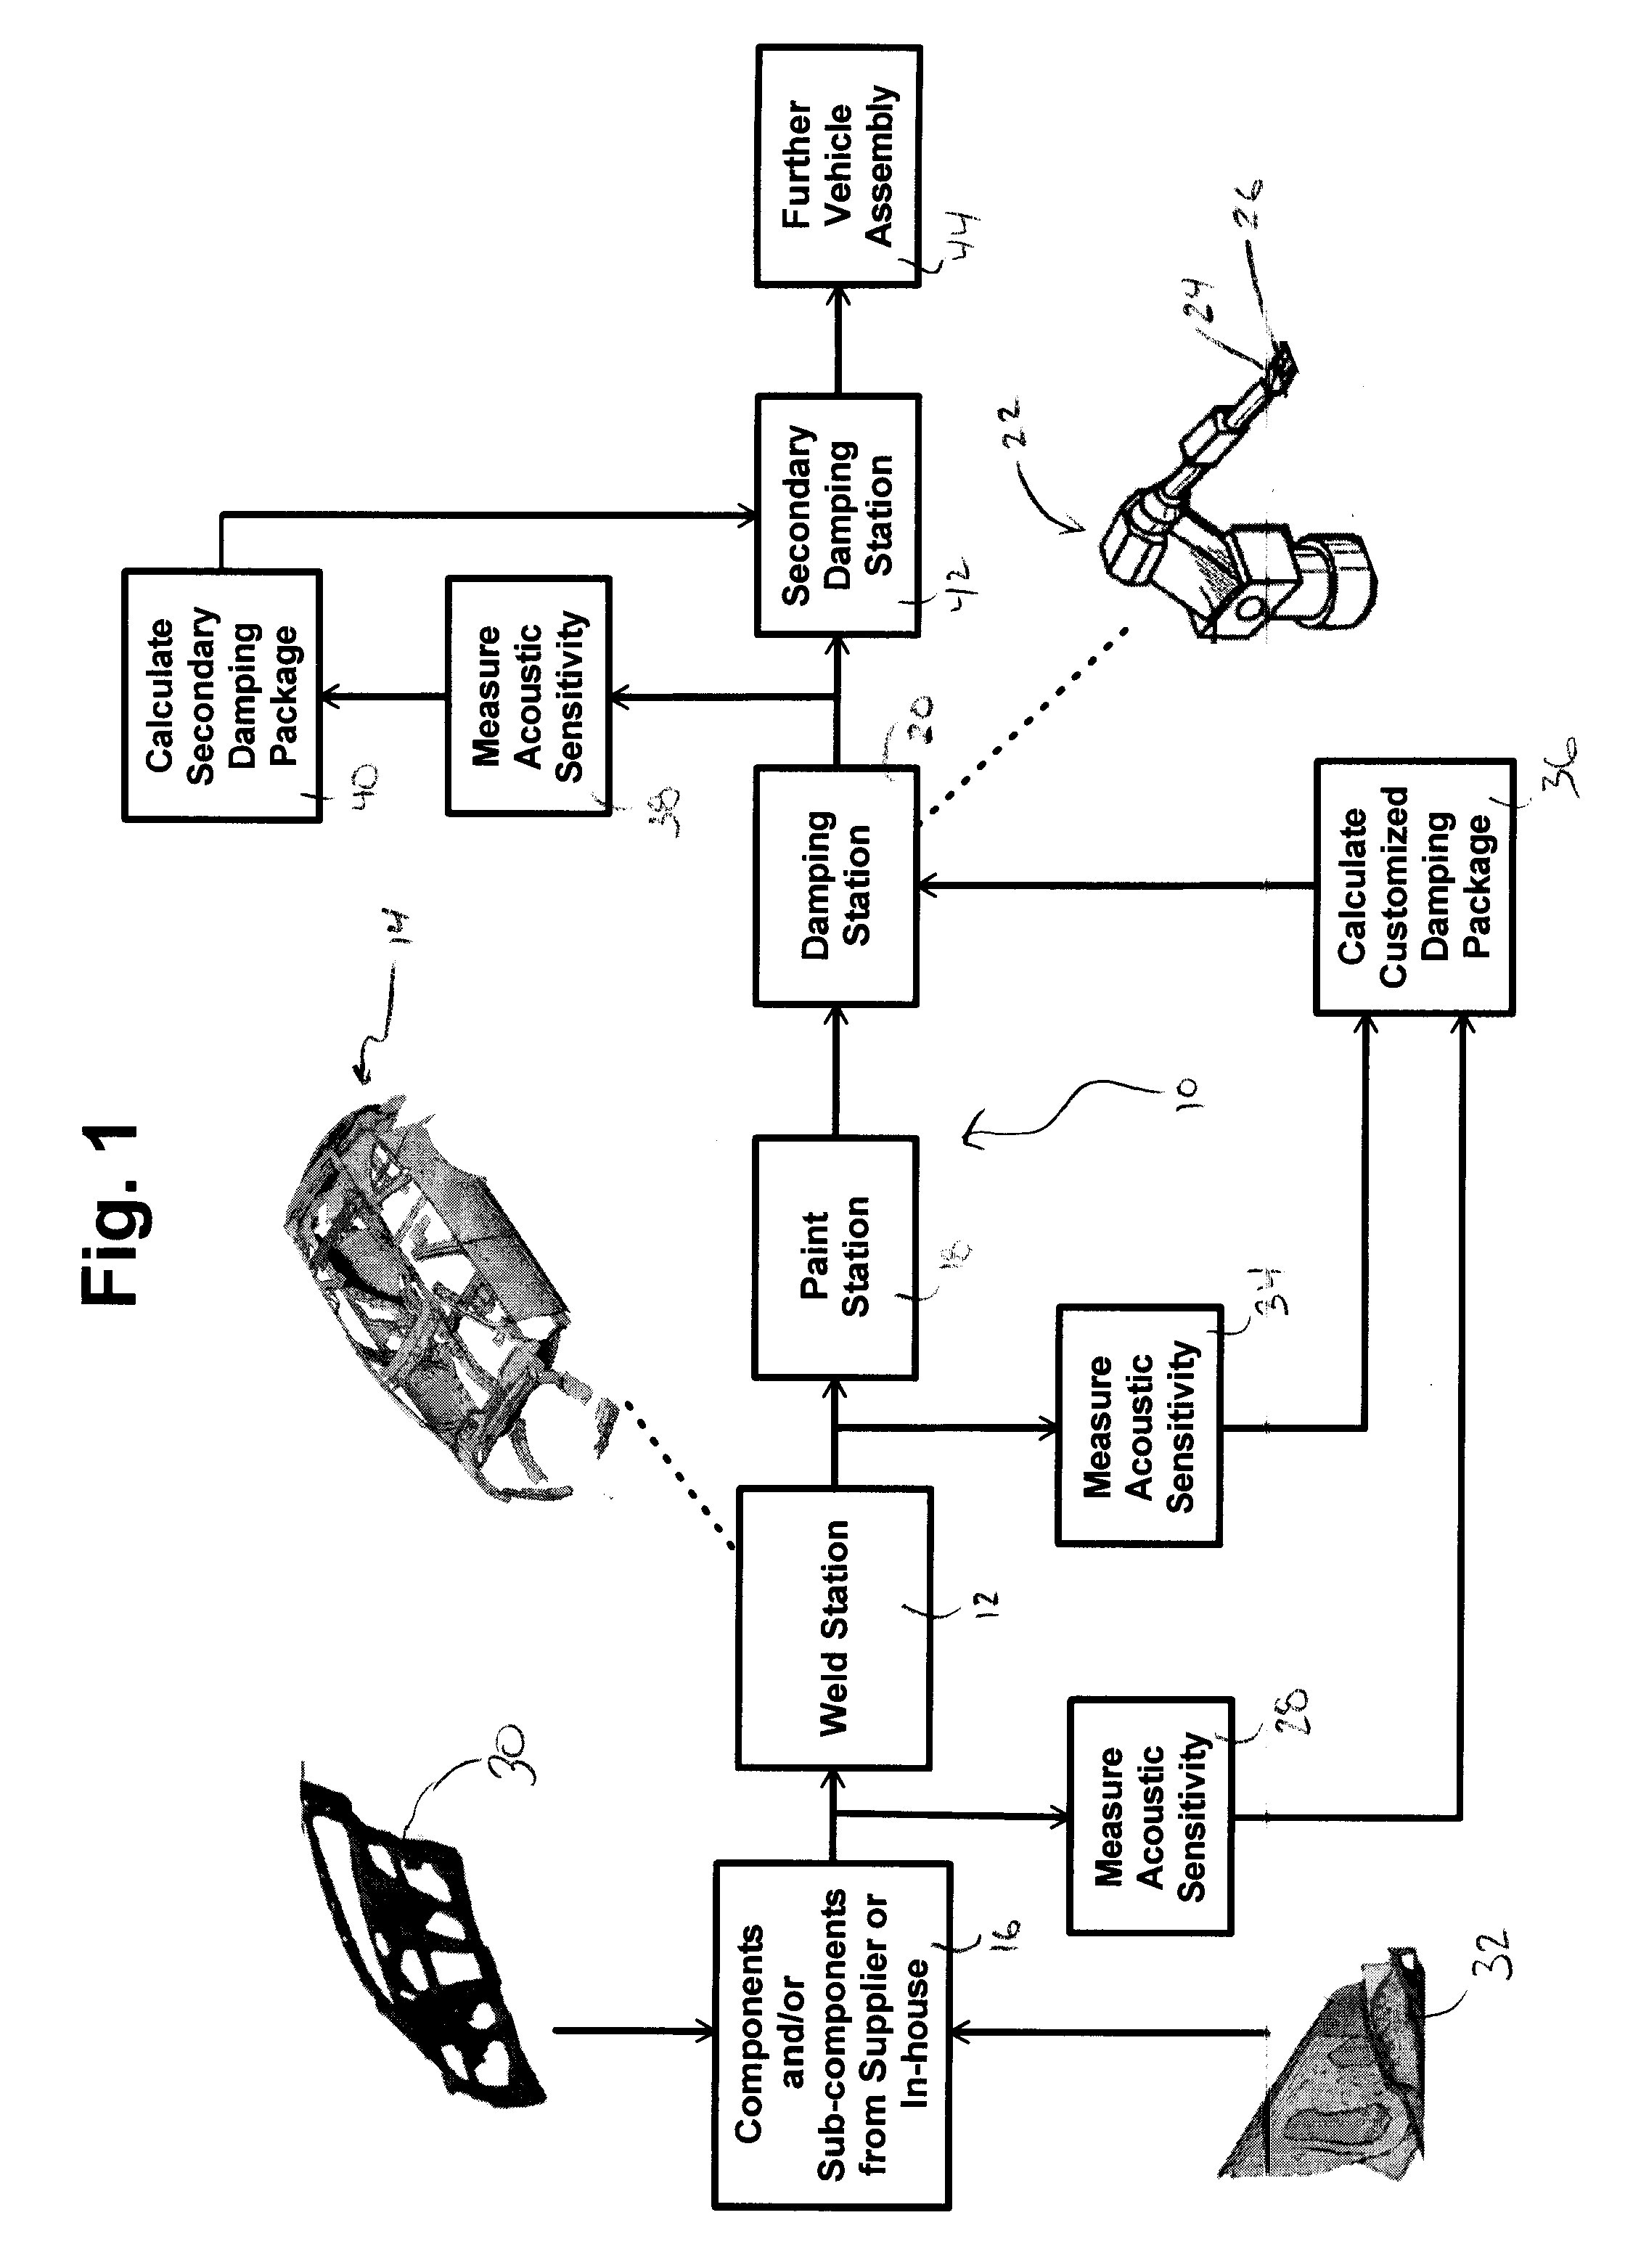 Adaptive vehicle manufacturing system and method